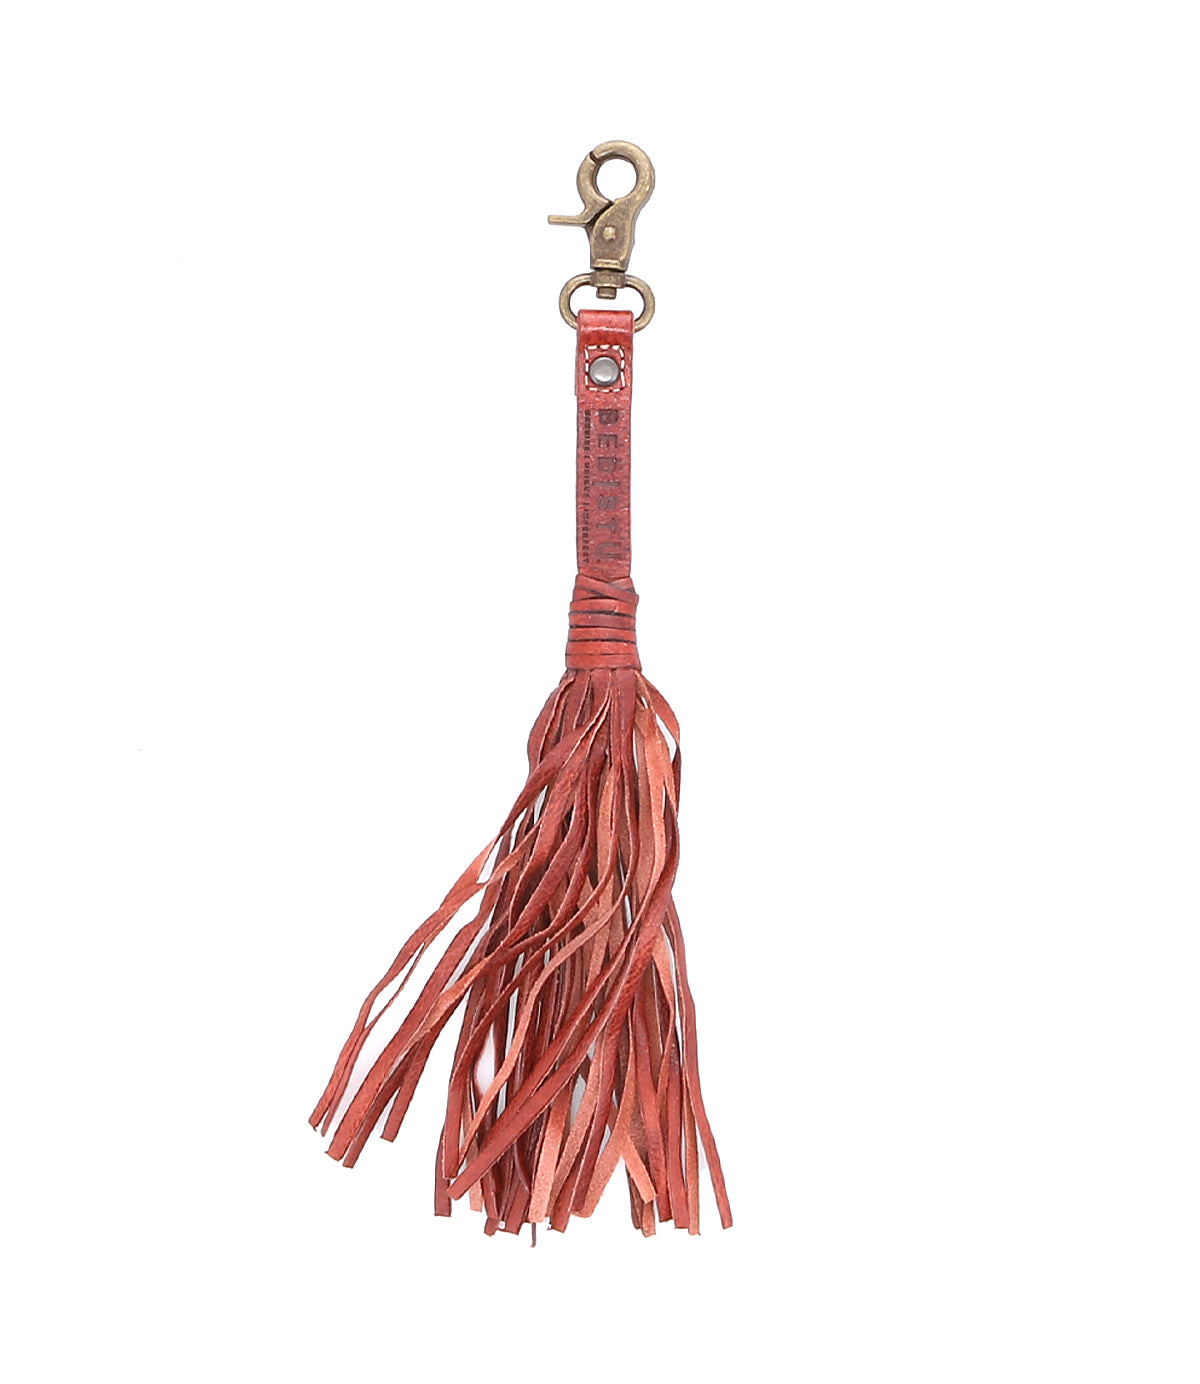 An accessory that combines personal expression and functionality, this red leather key ring features tassels and acts as a fashionable Bed Stu Tassel Clip.